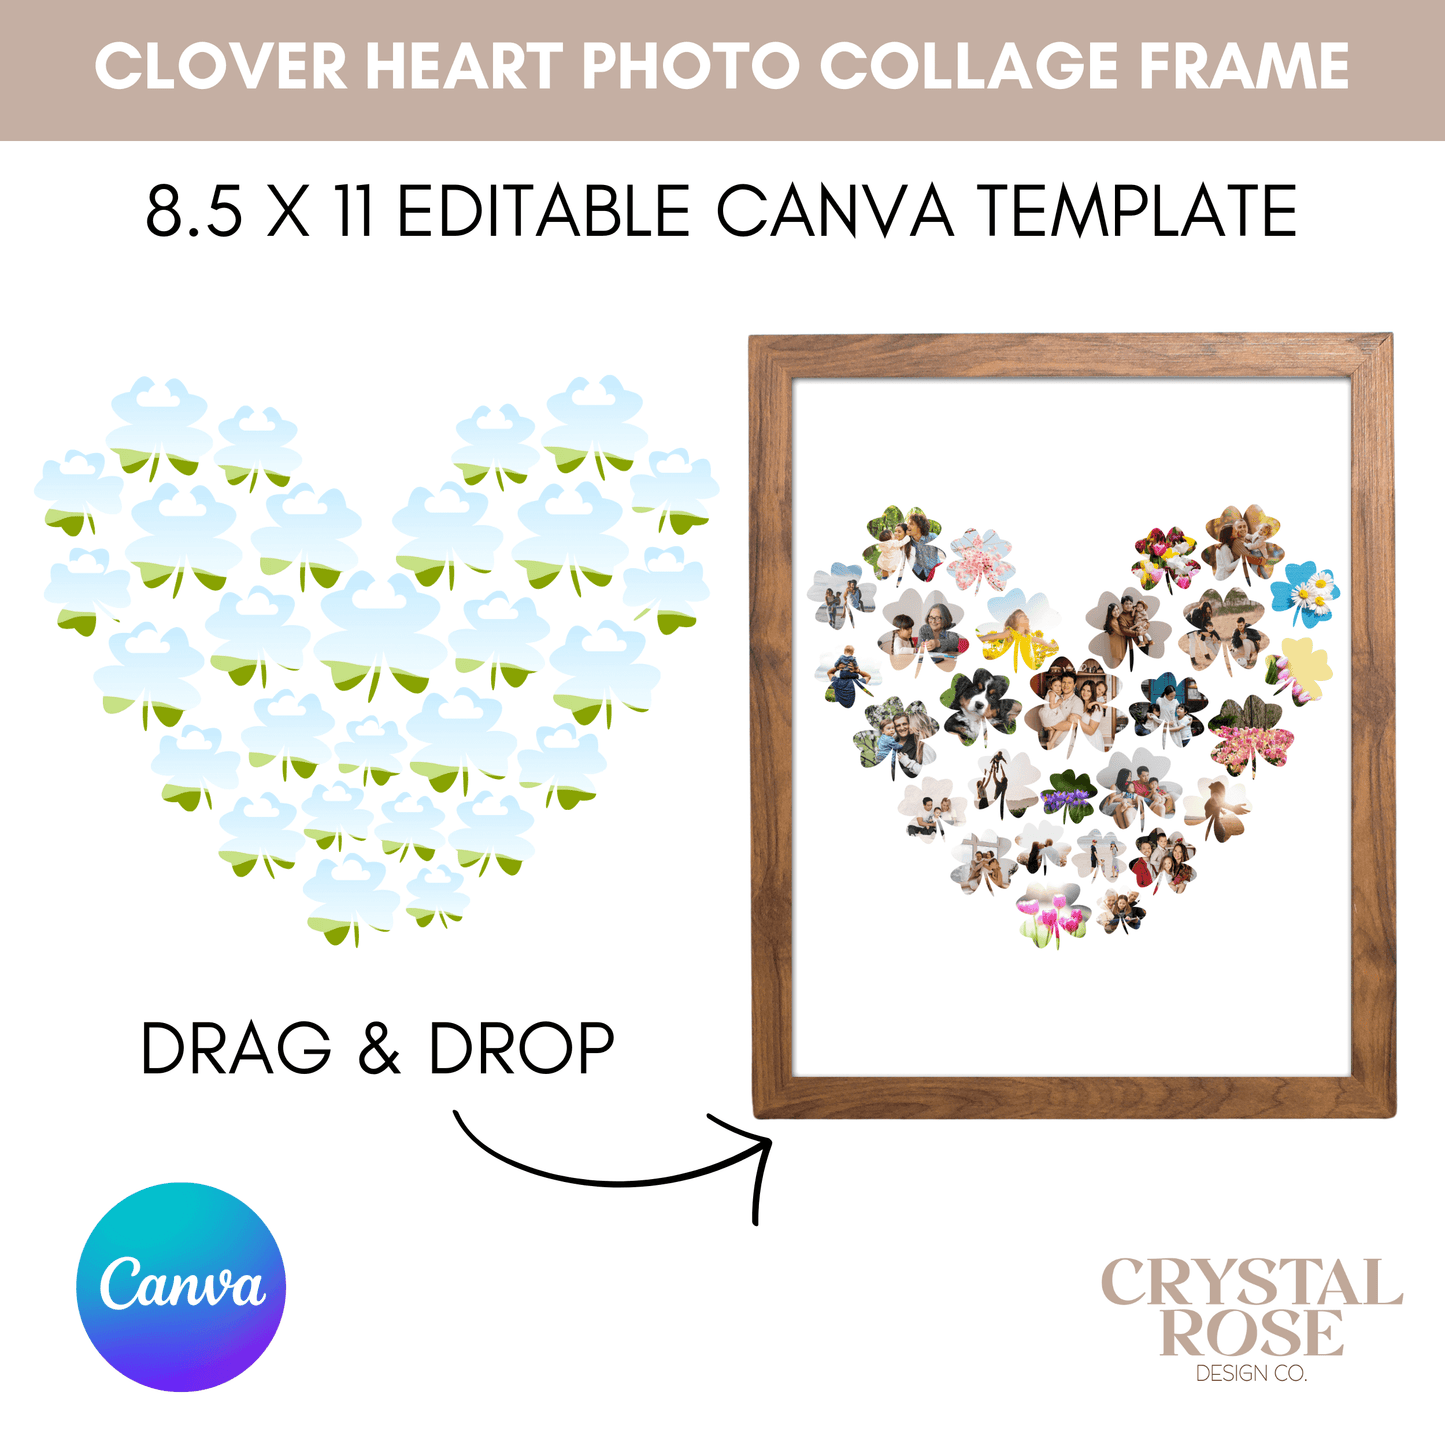 Clover Heart Photo Collage, Collage Template, Photo Collage Canva, Canva Heart Collage, Heart Shape Photo, Custom Photo Collage